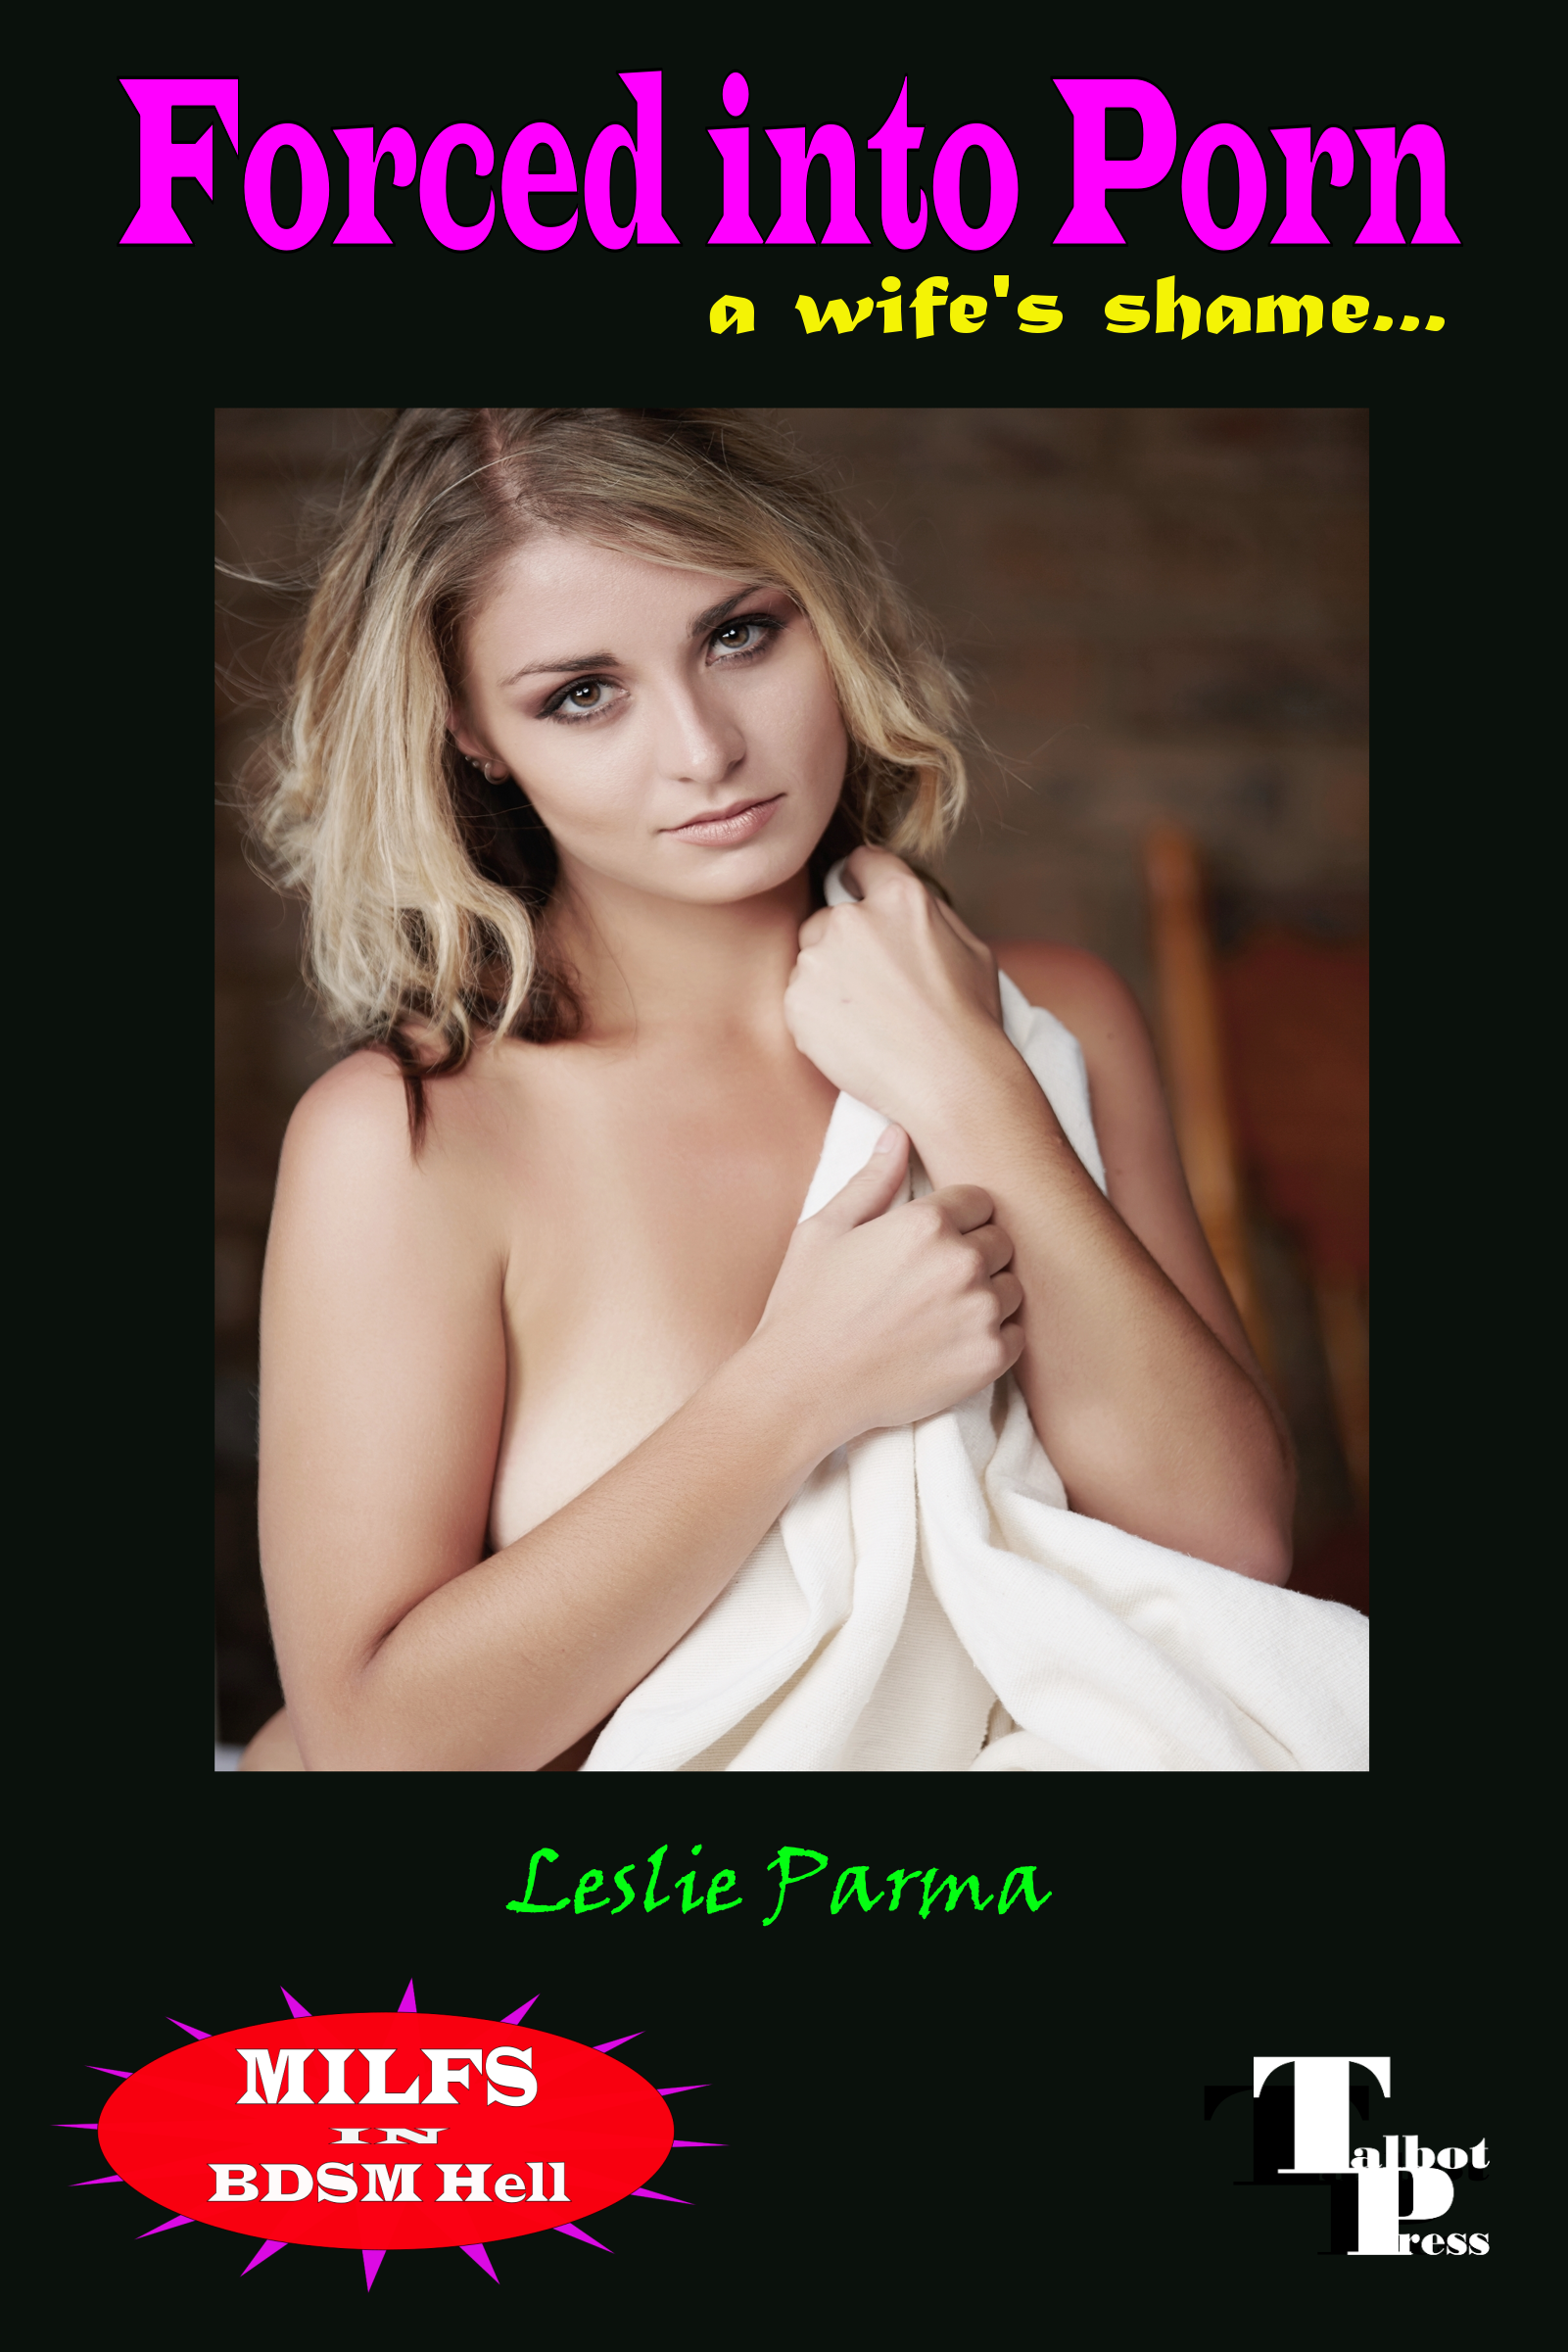 Housewife Bdsm Porn - Forced into Porn, an Ebook by Leslie Parma